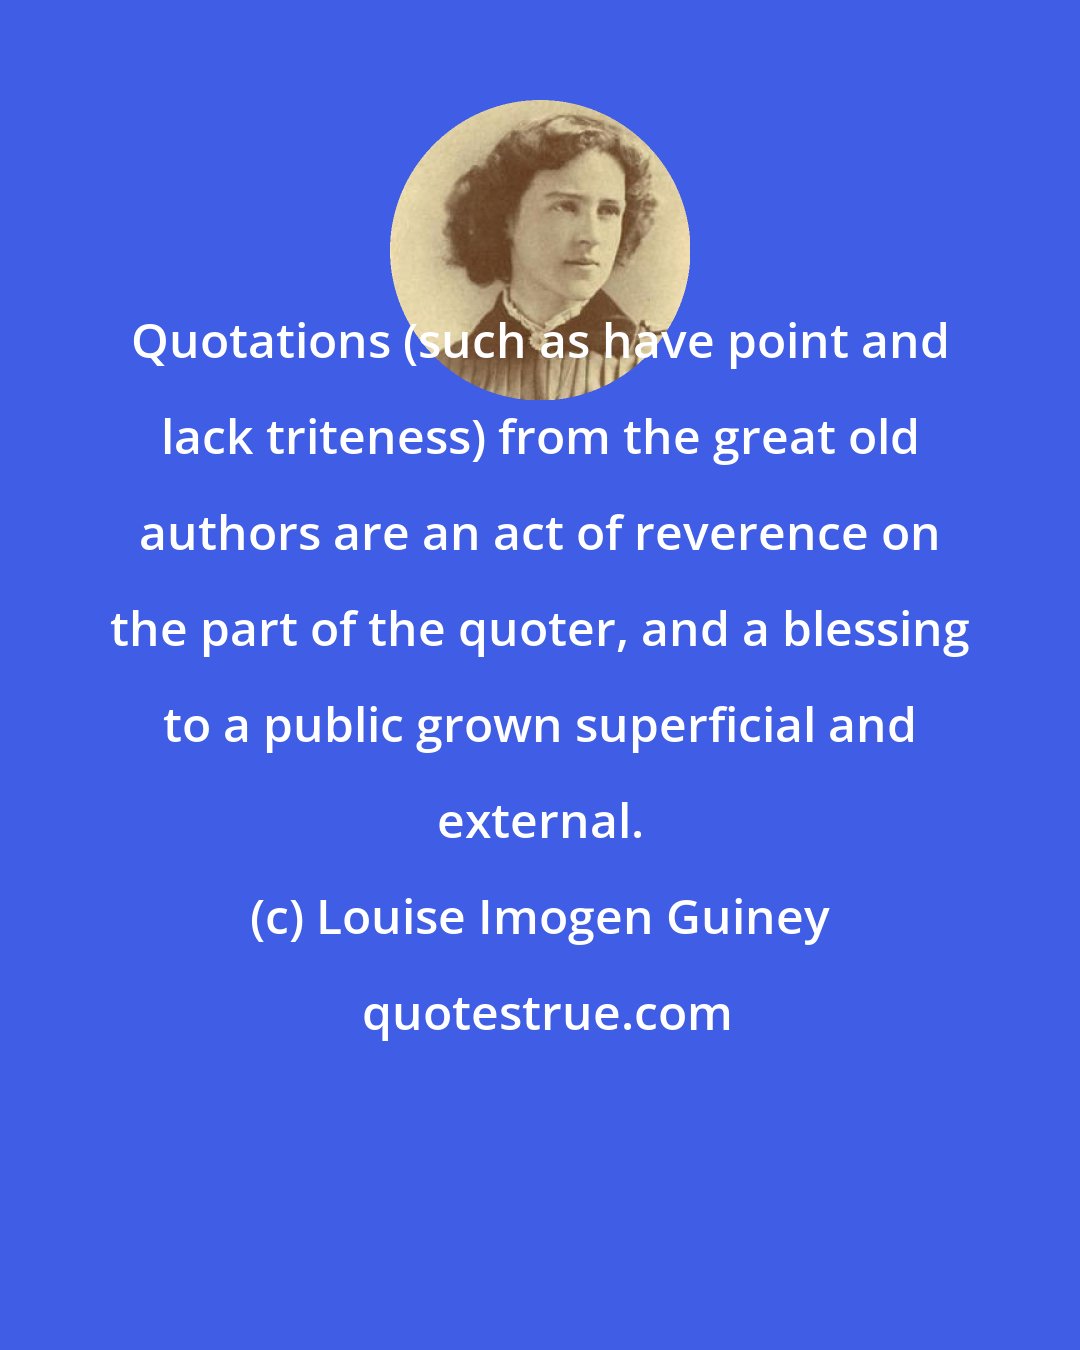 Louise Imogen Guiney: Quotations (such as have point and lack triteness) from the great old authors are an act of reverence on the part of the quoter, and a blessing to a public grown superficial and external.